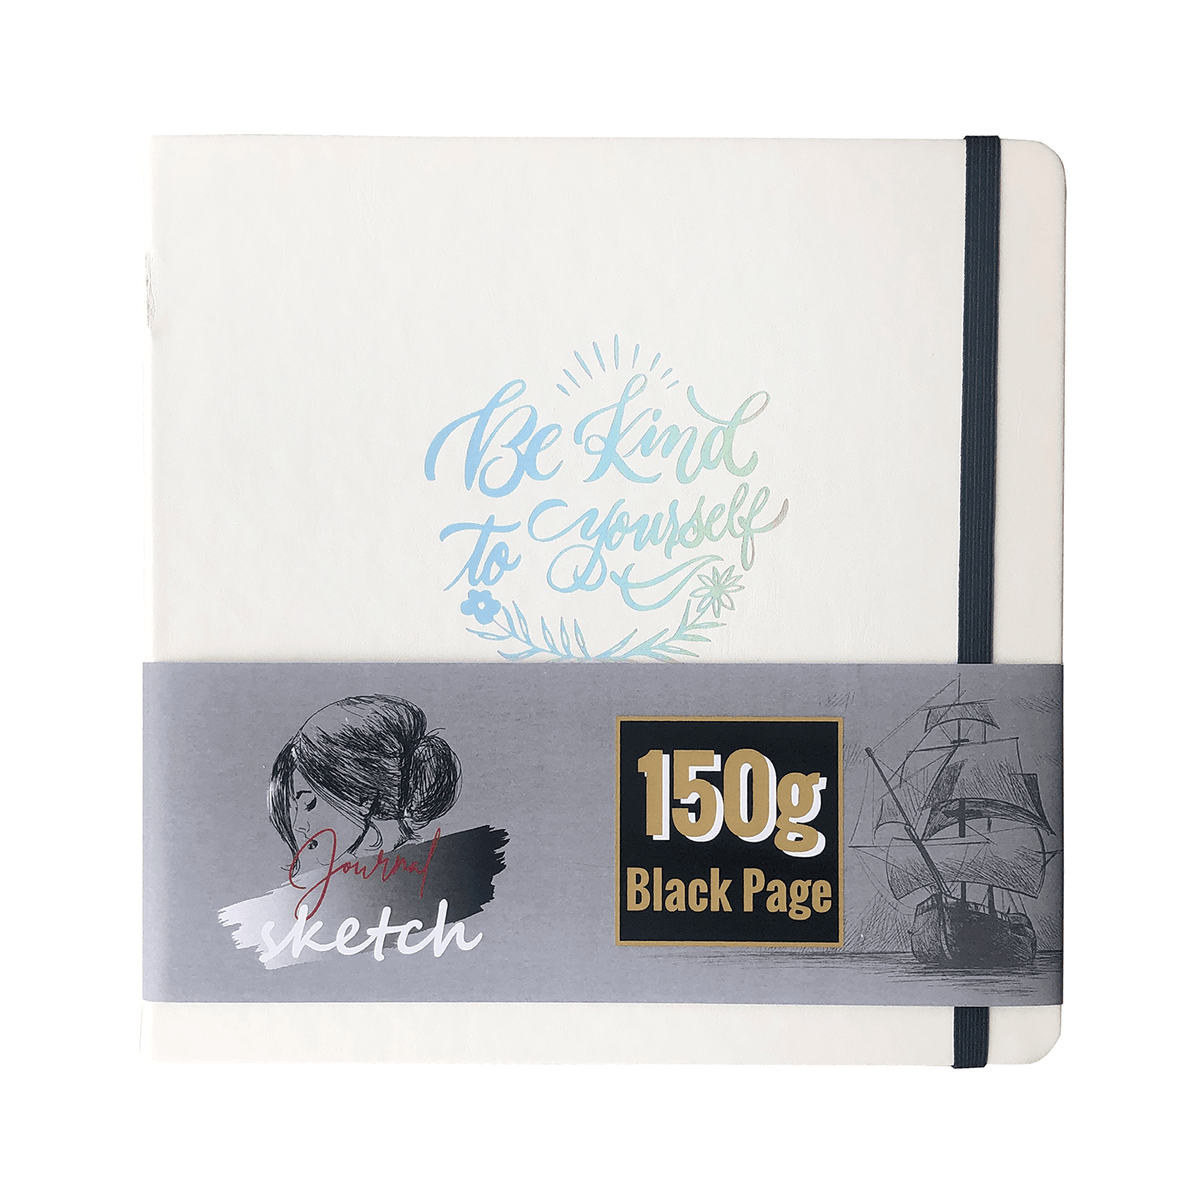 Square Sketchbook – 8 x 8 inch Hardcover Sketch Journal – 150gsm Black Paper 160 Pages with Elastic Closure - White Color Cover